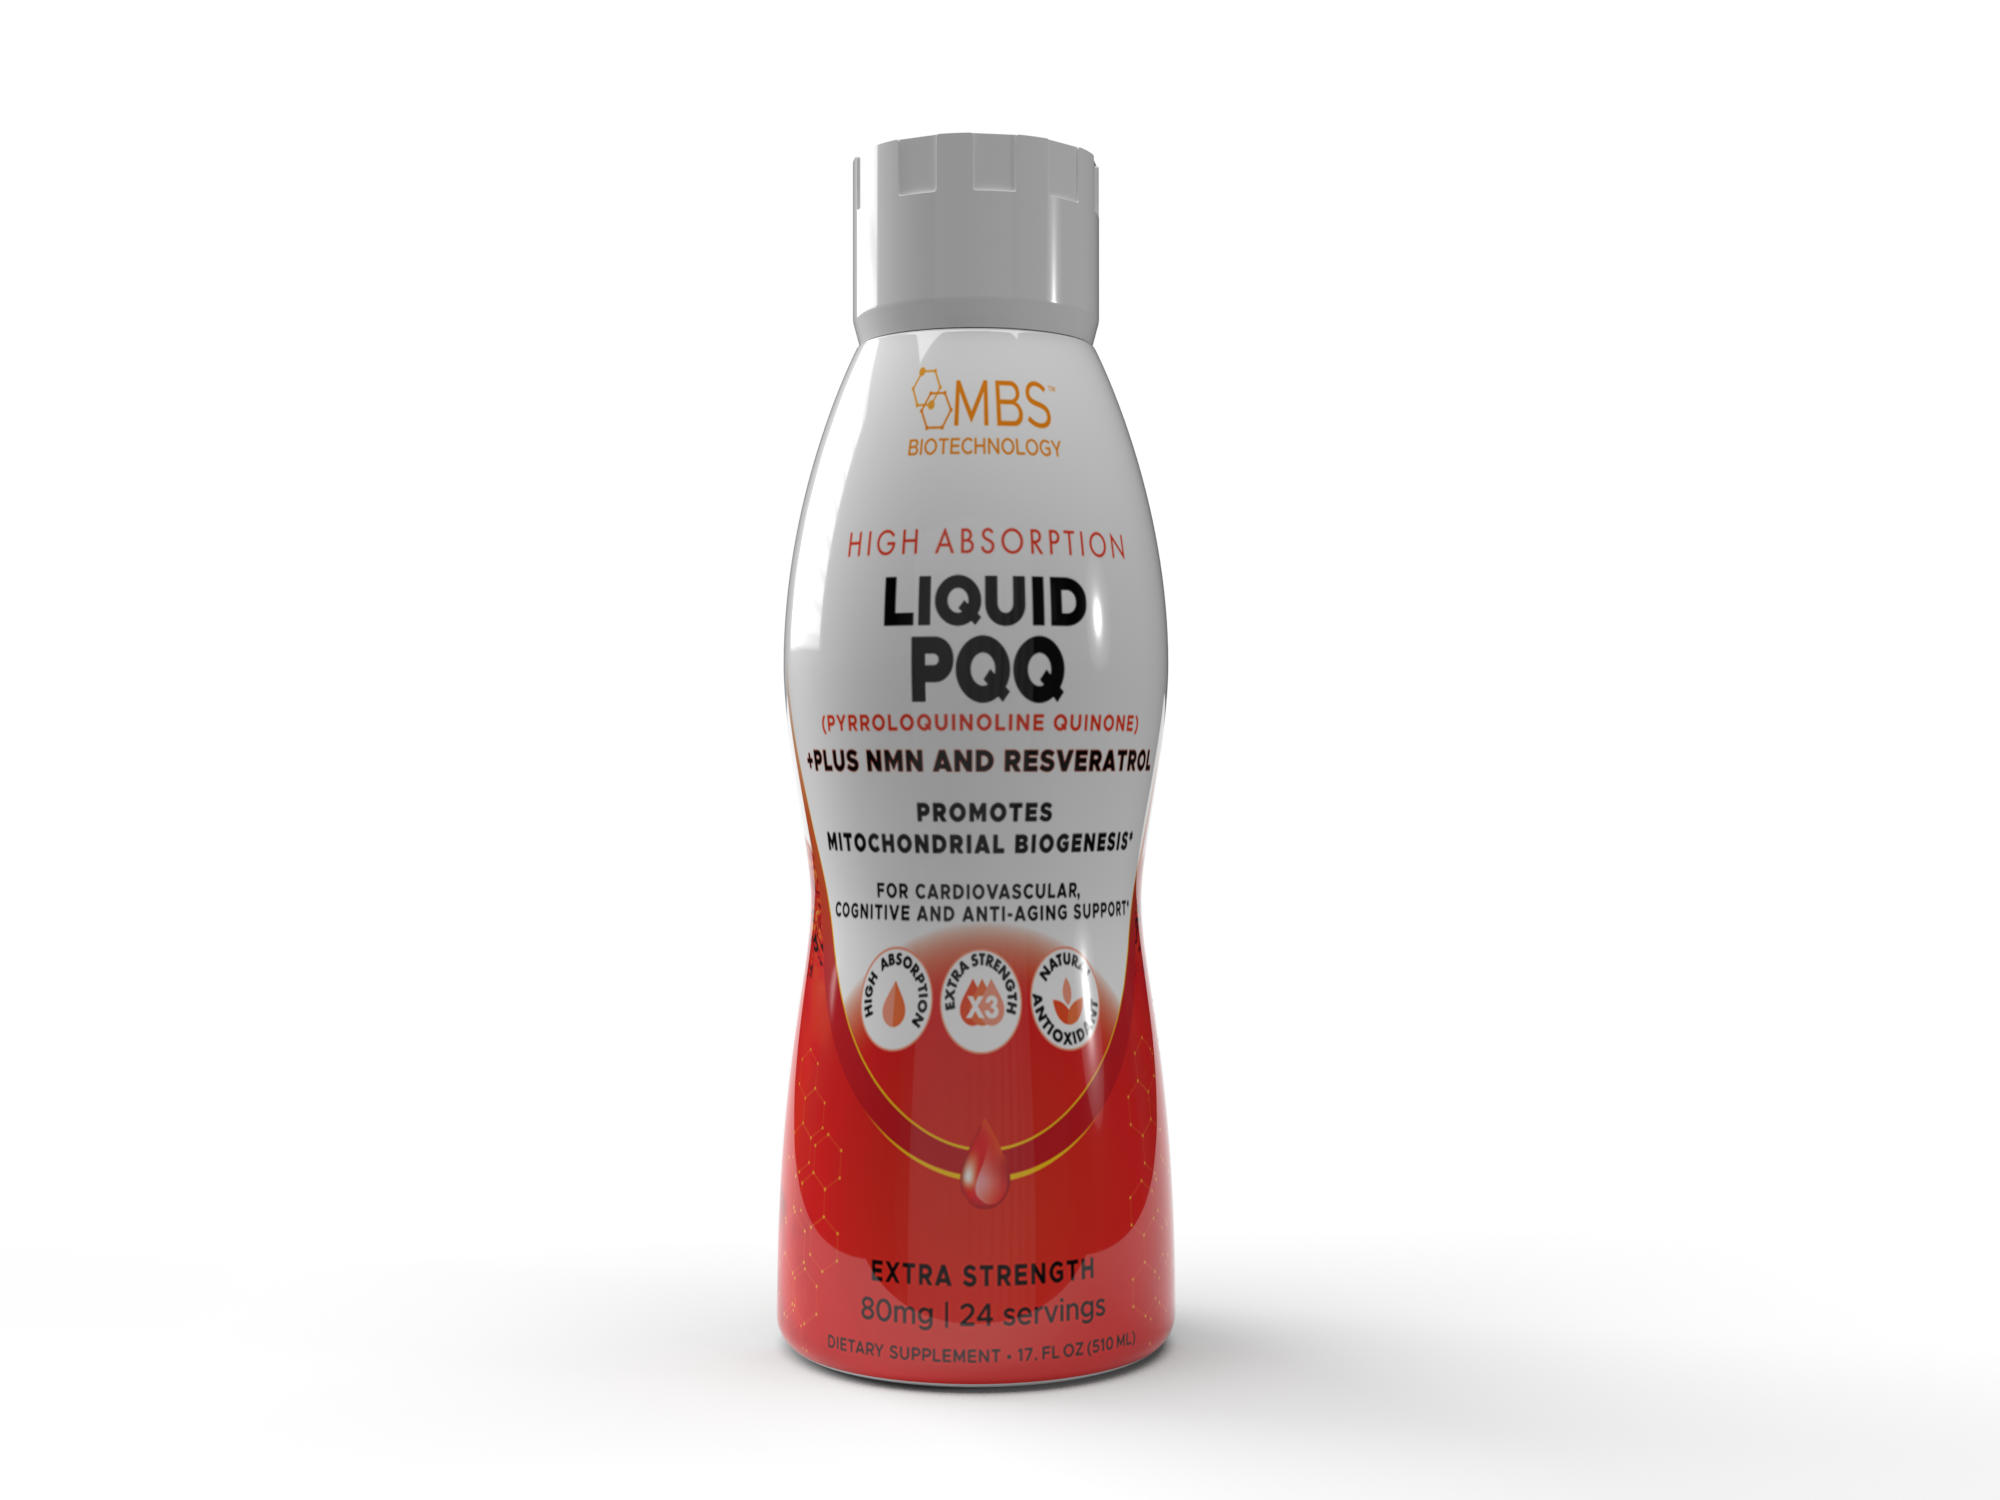 Liquid PQQ bottle with label promoting cardiovascular and cognitive health.